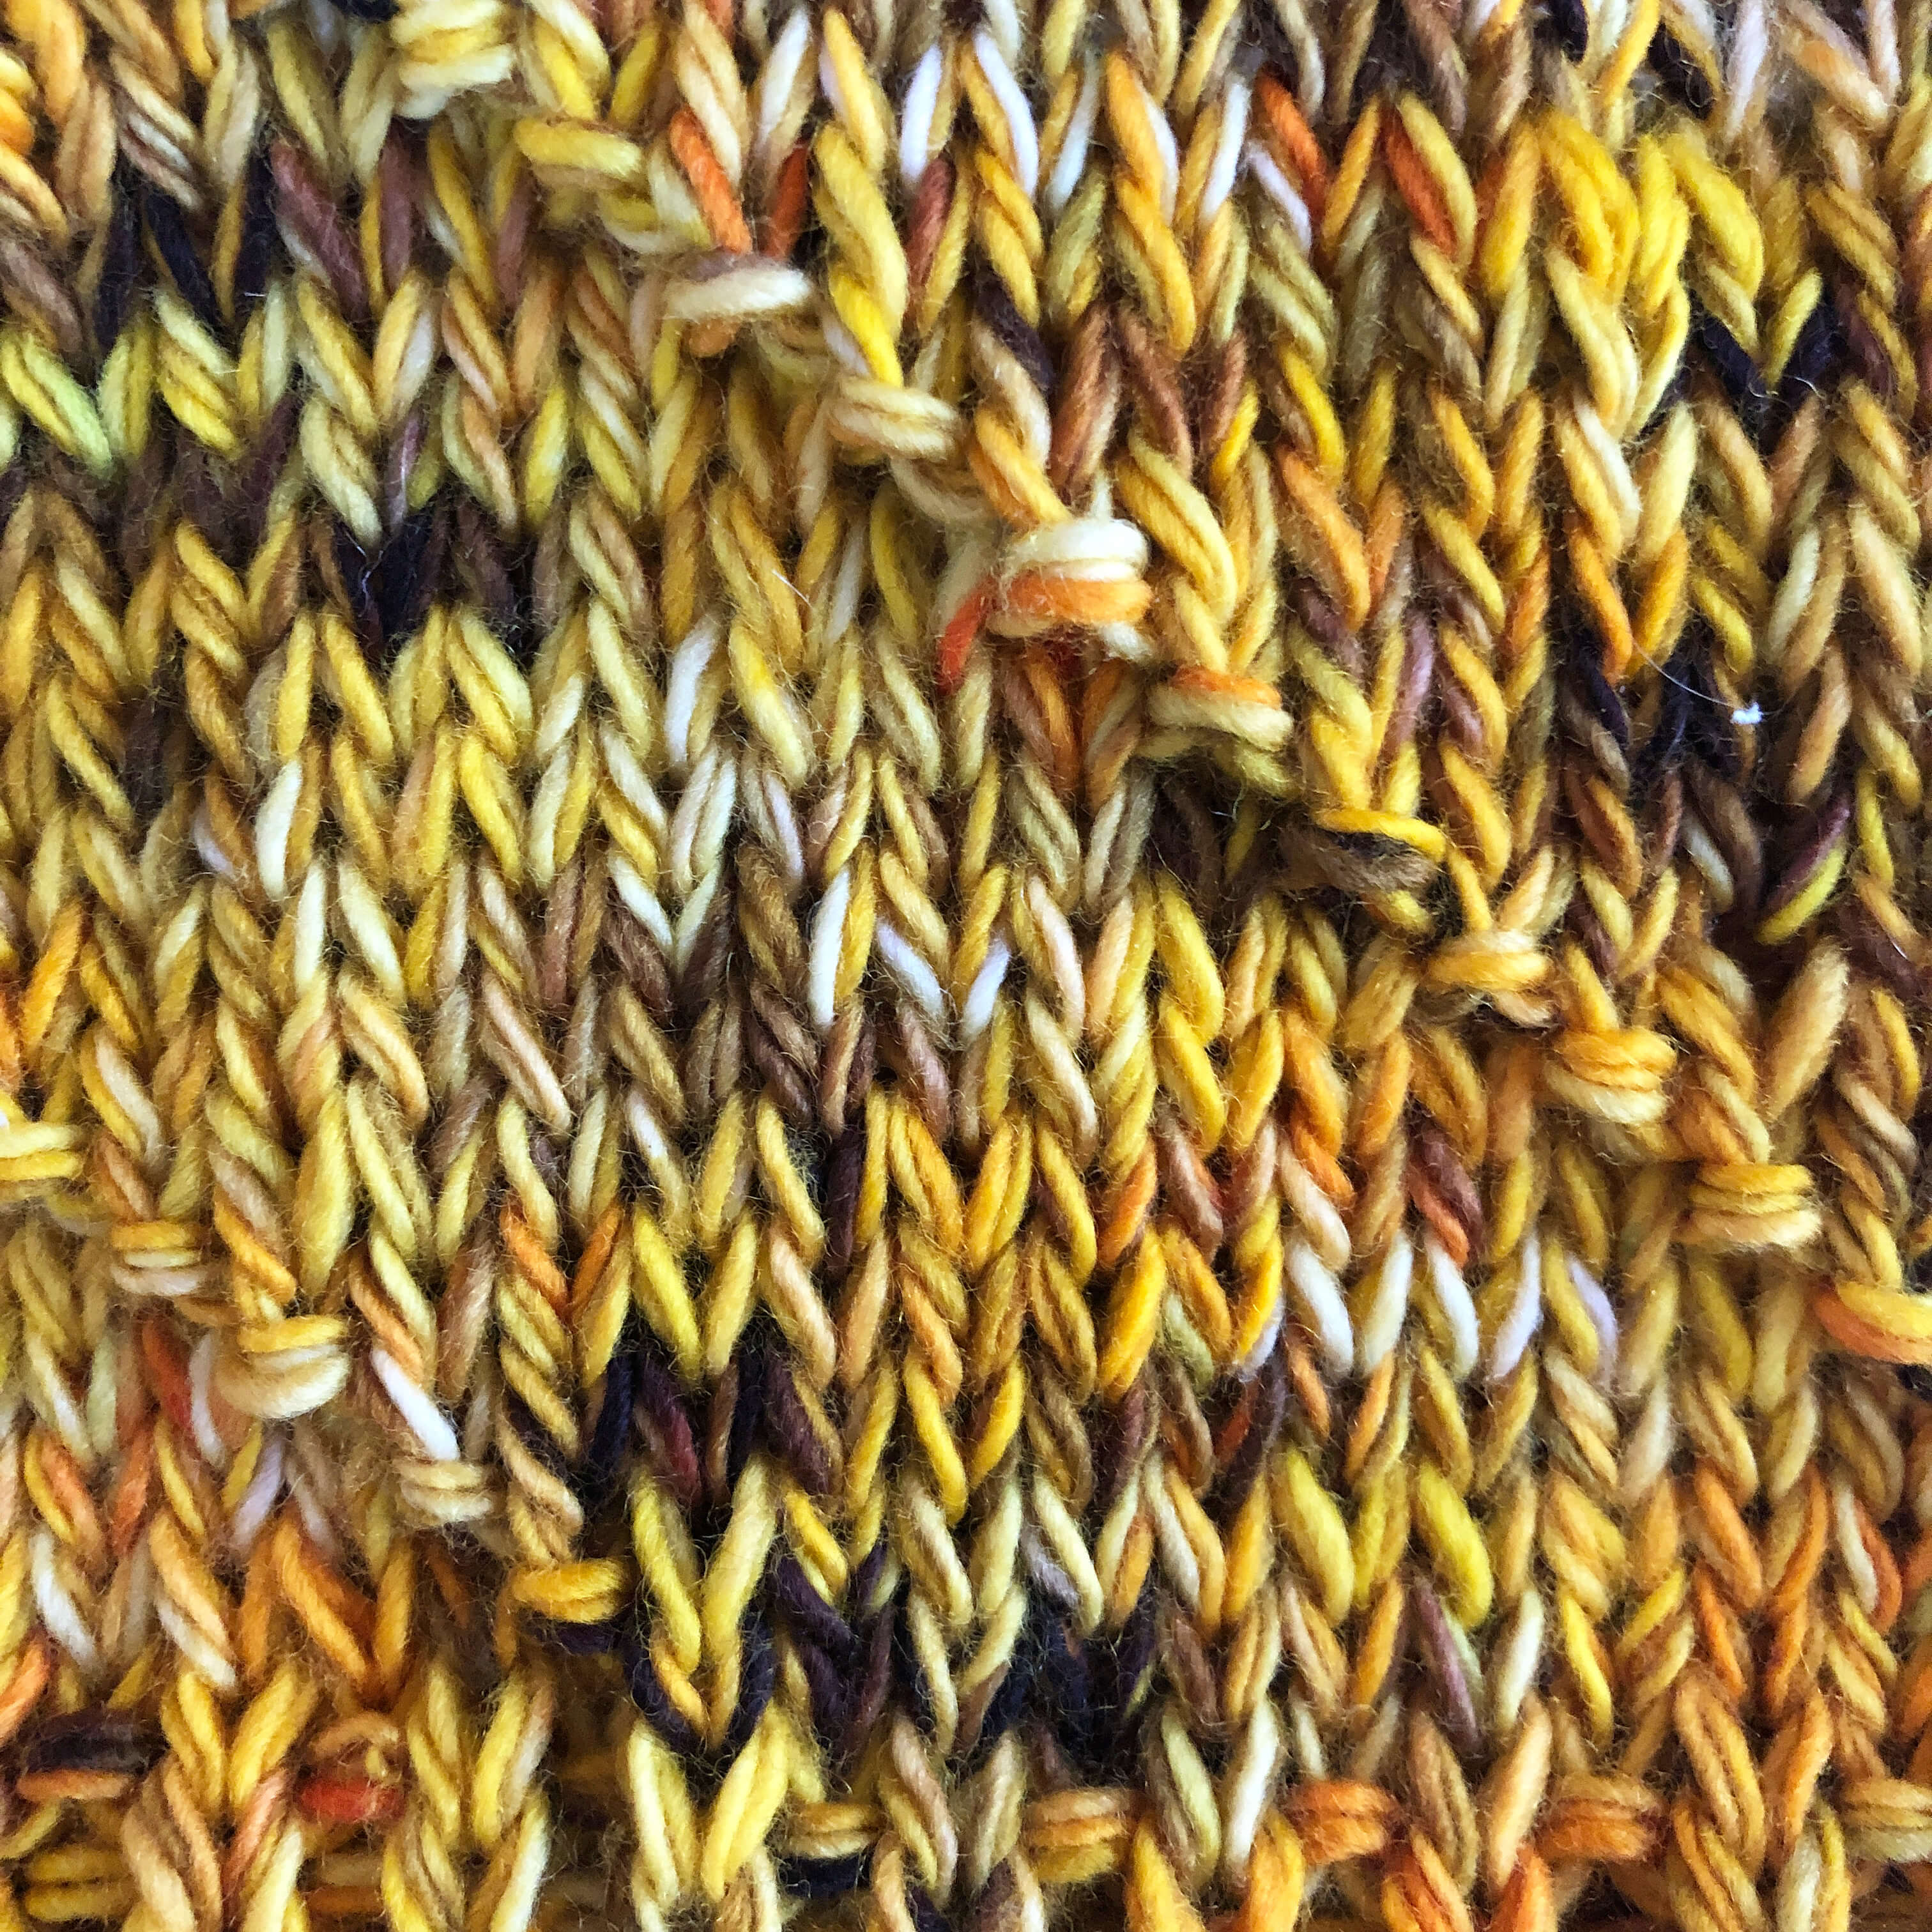 a close-up view of the Purl Swirl pattern